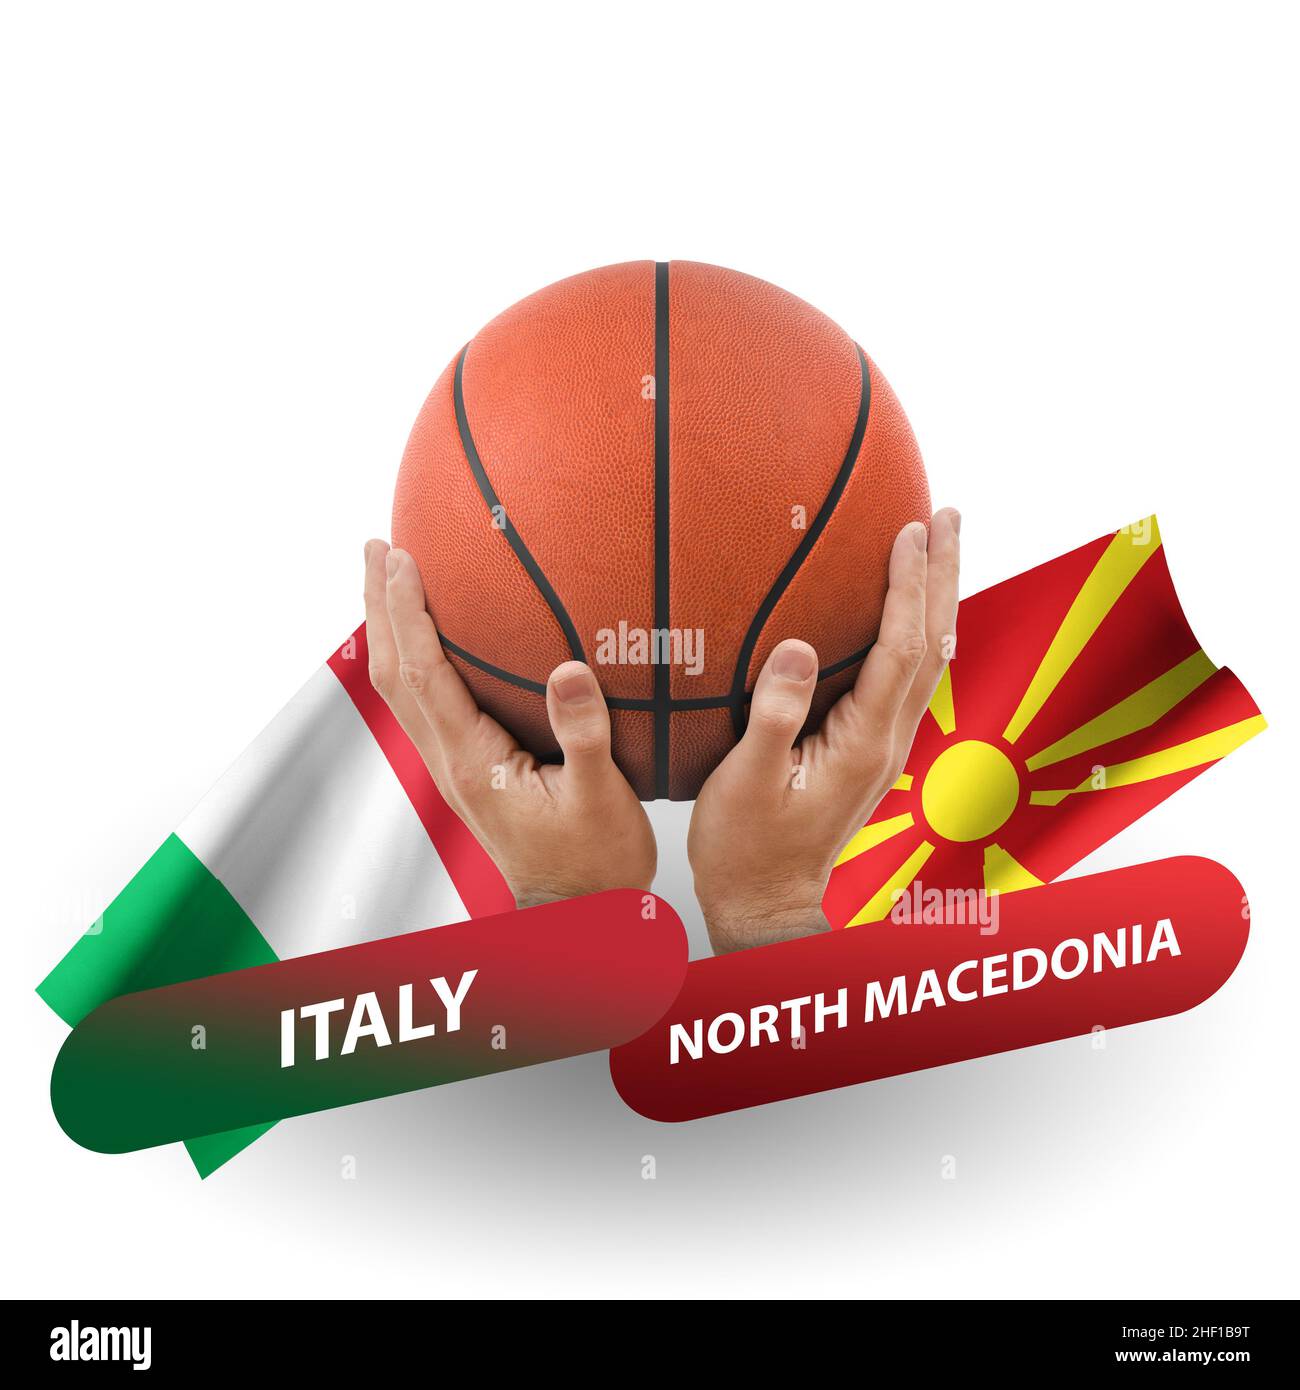 Italy vs north macedonia Cut Out Stock Images and Pictures